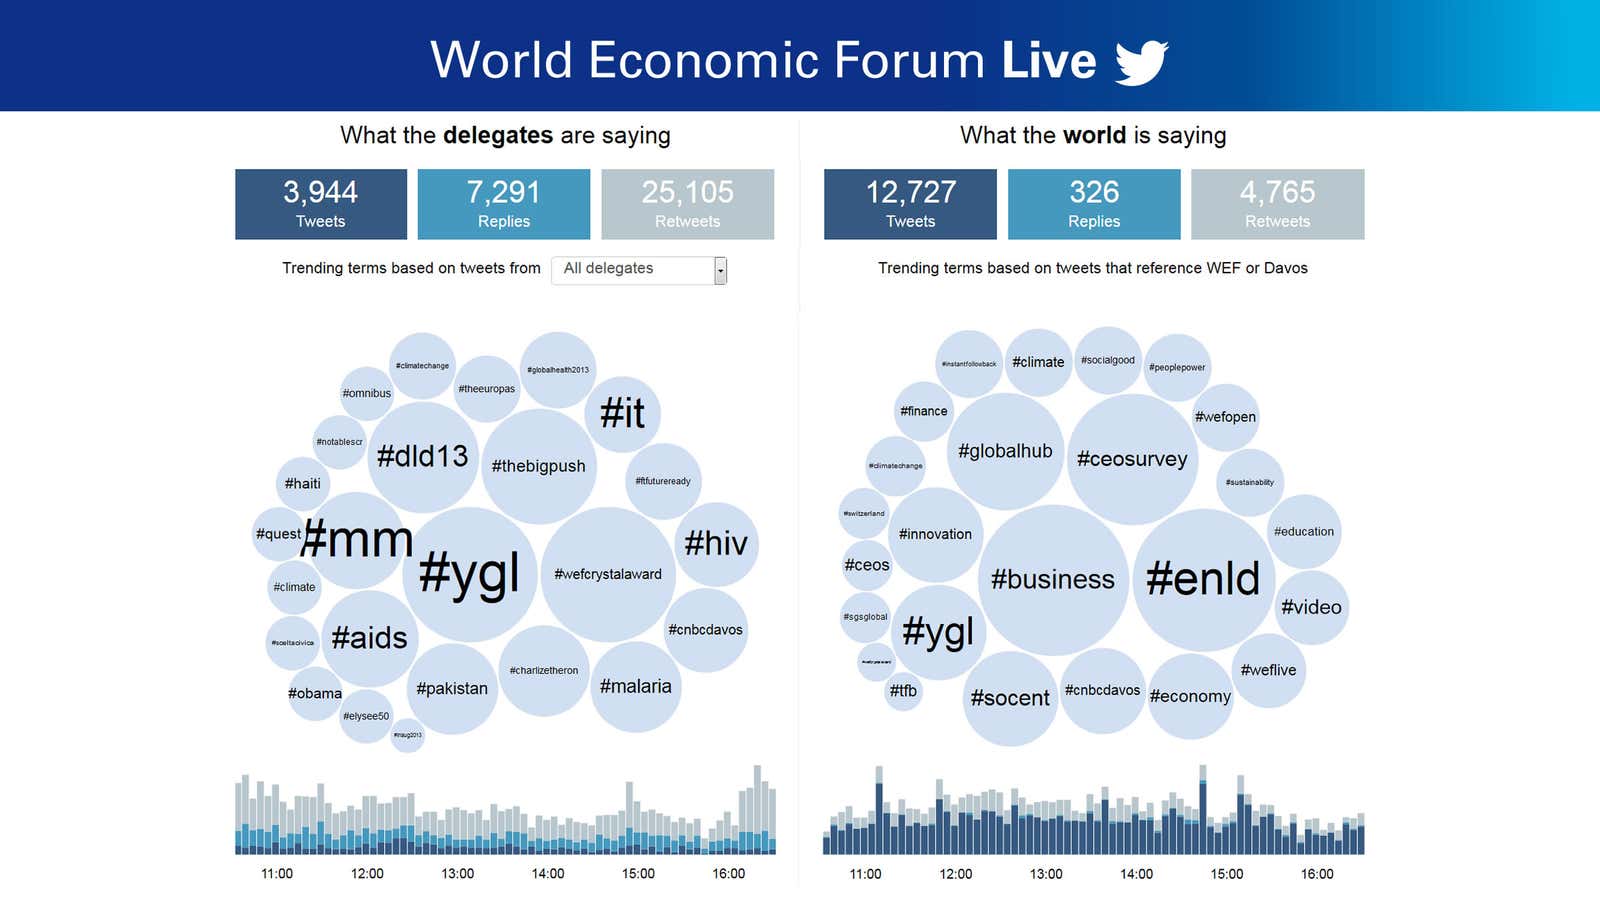 Young Global Leaders (#YGL) continues to influence the conversations at the World Economic Forum